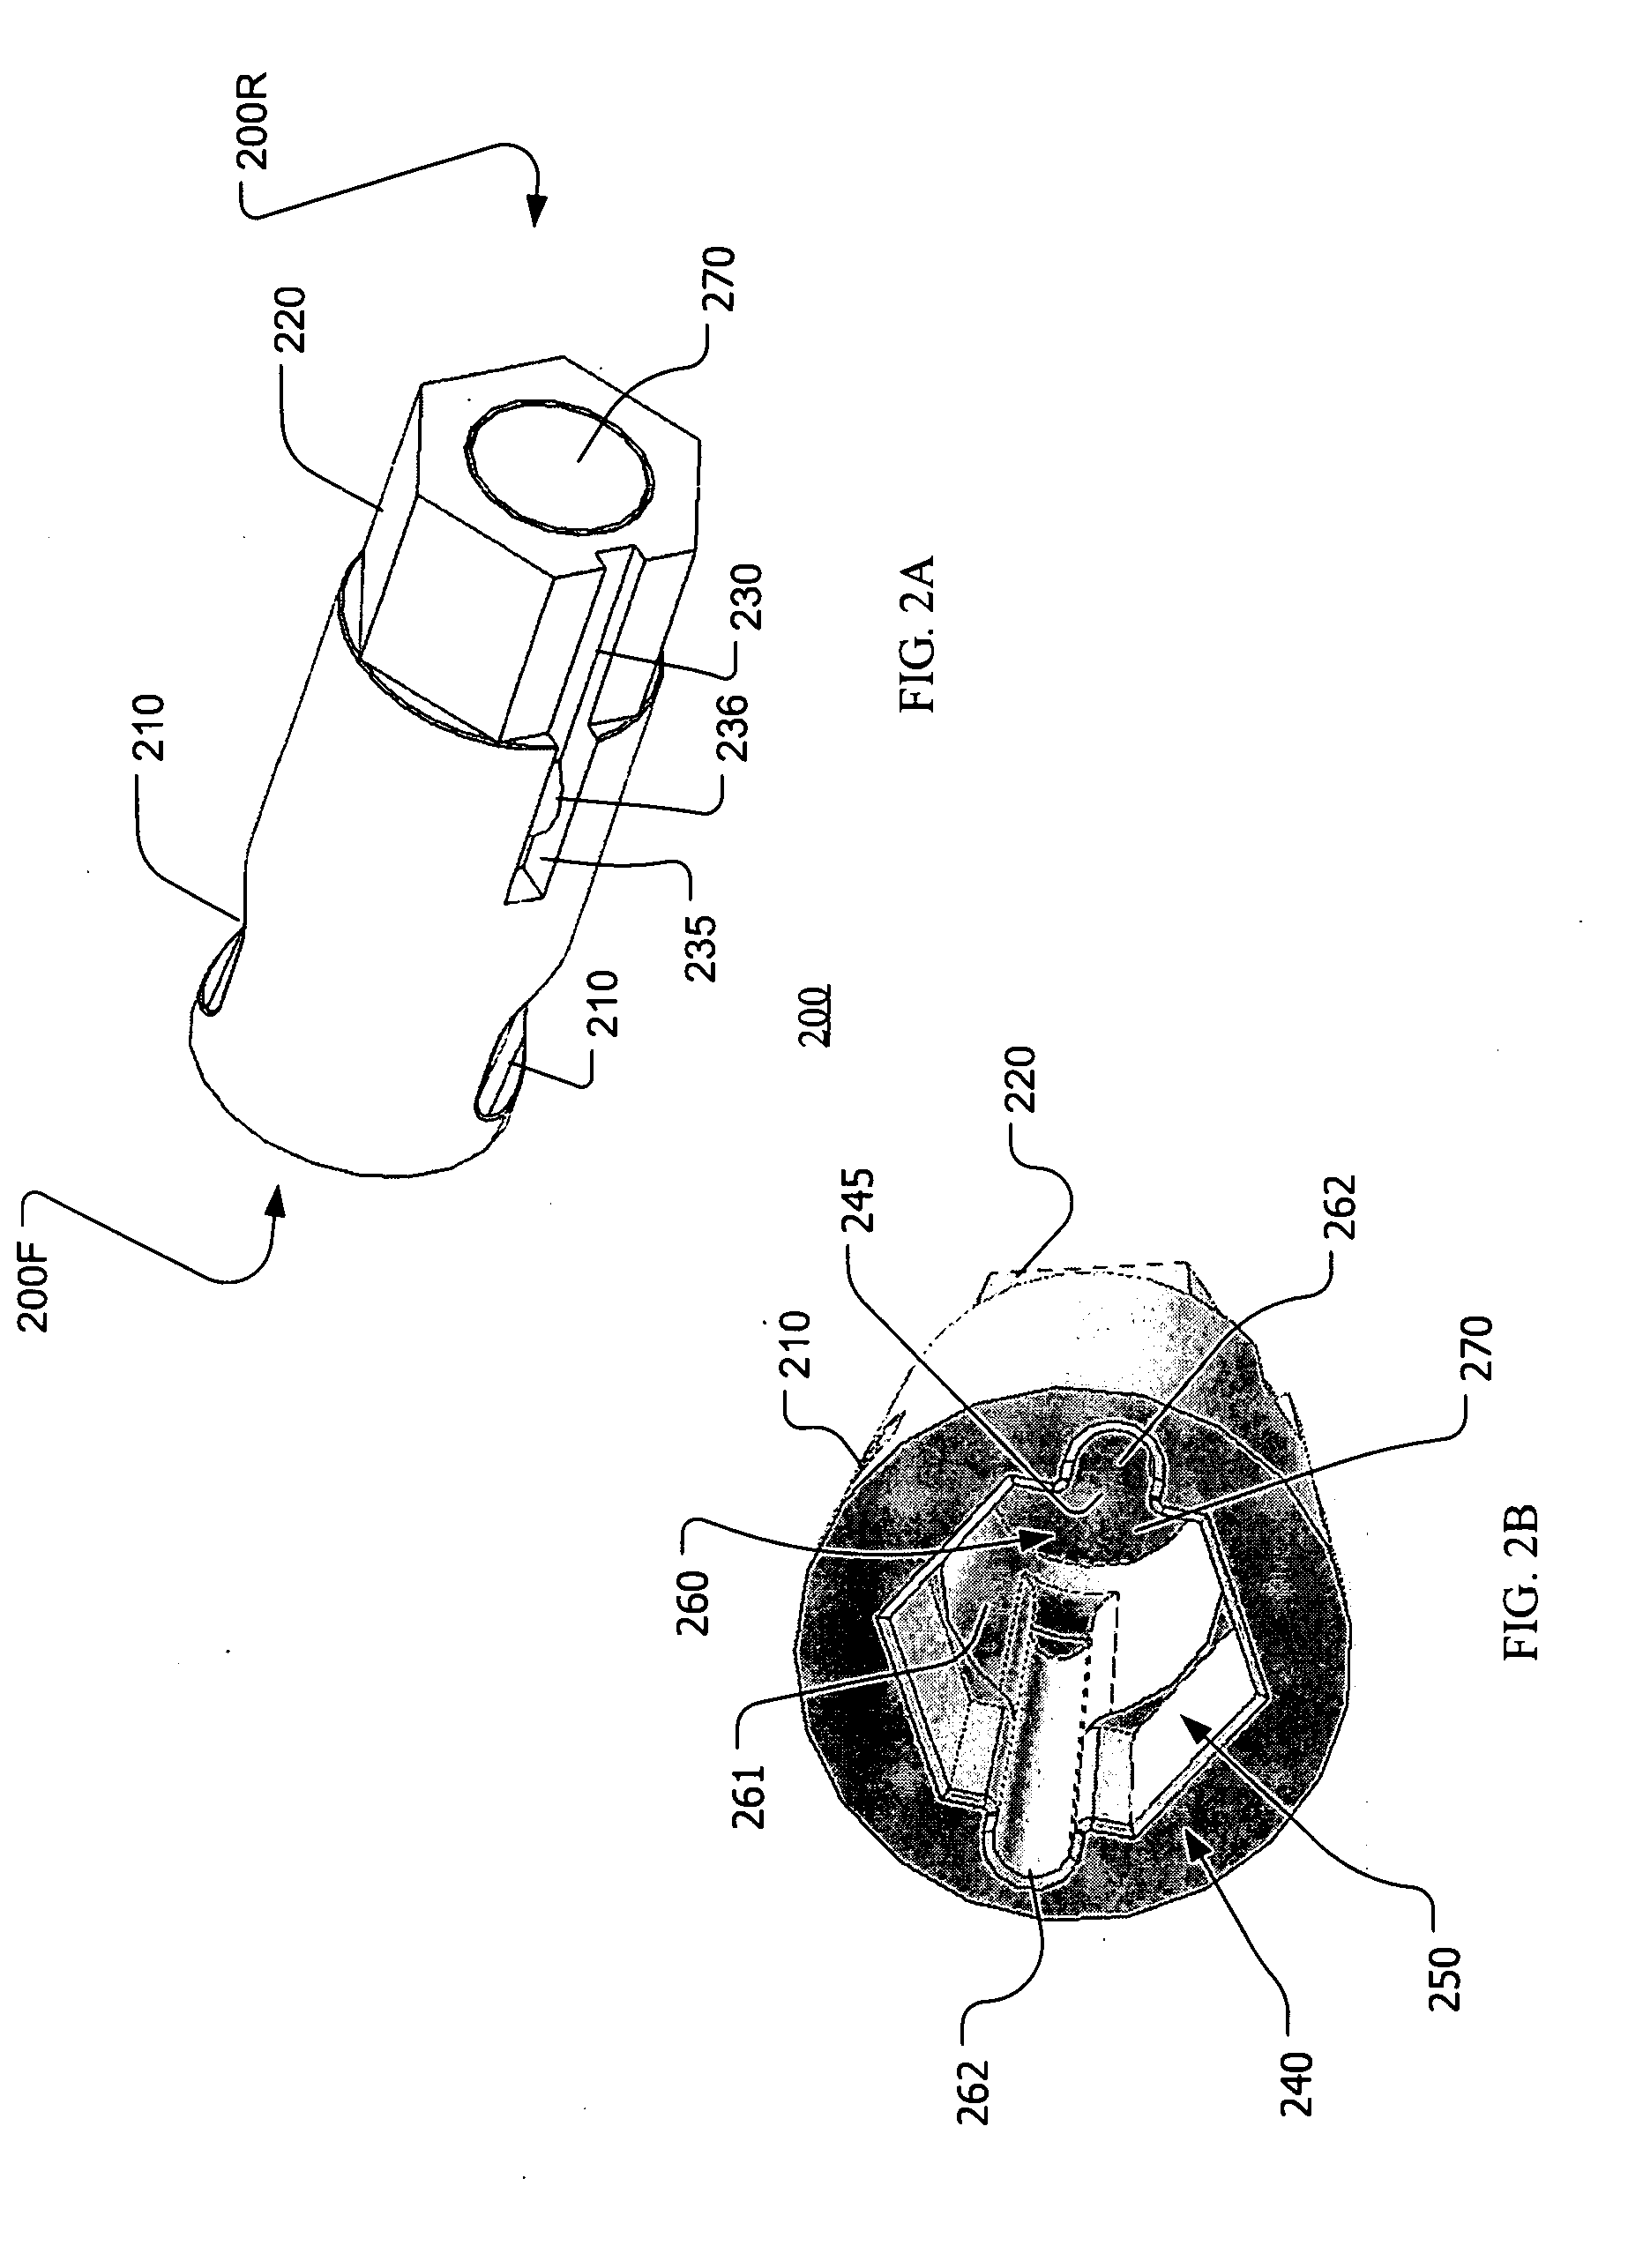 Compound tool with screwdriver attachment